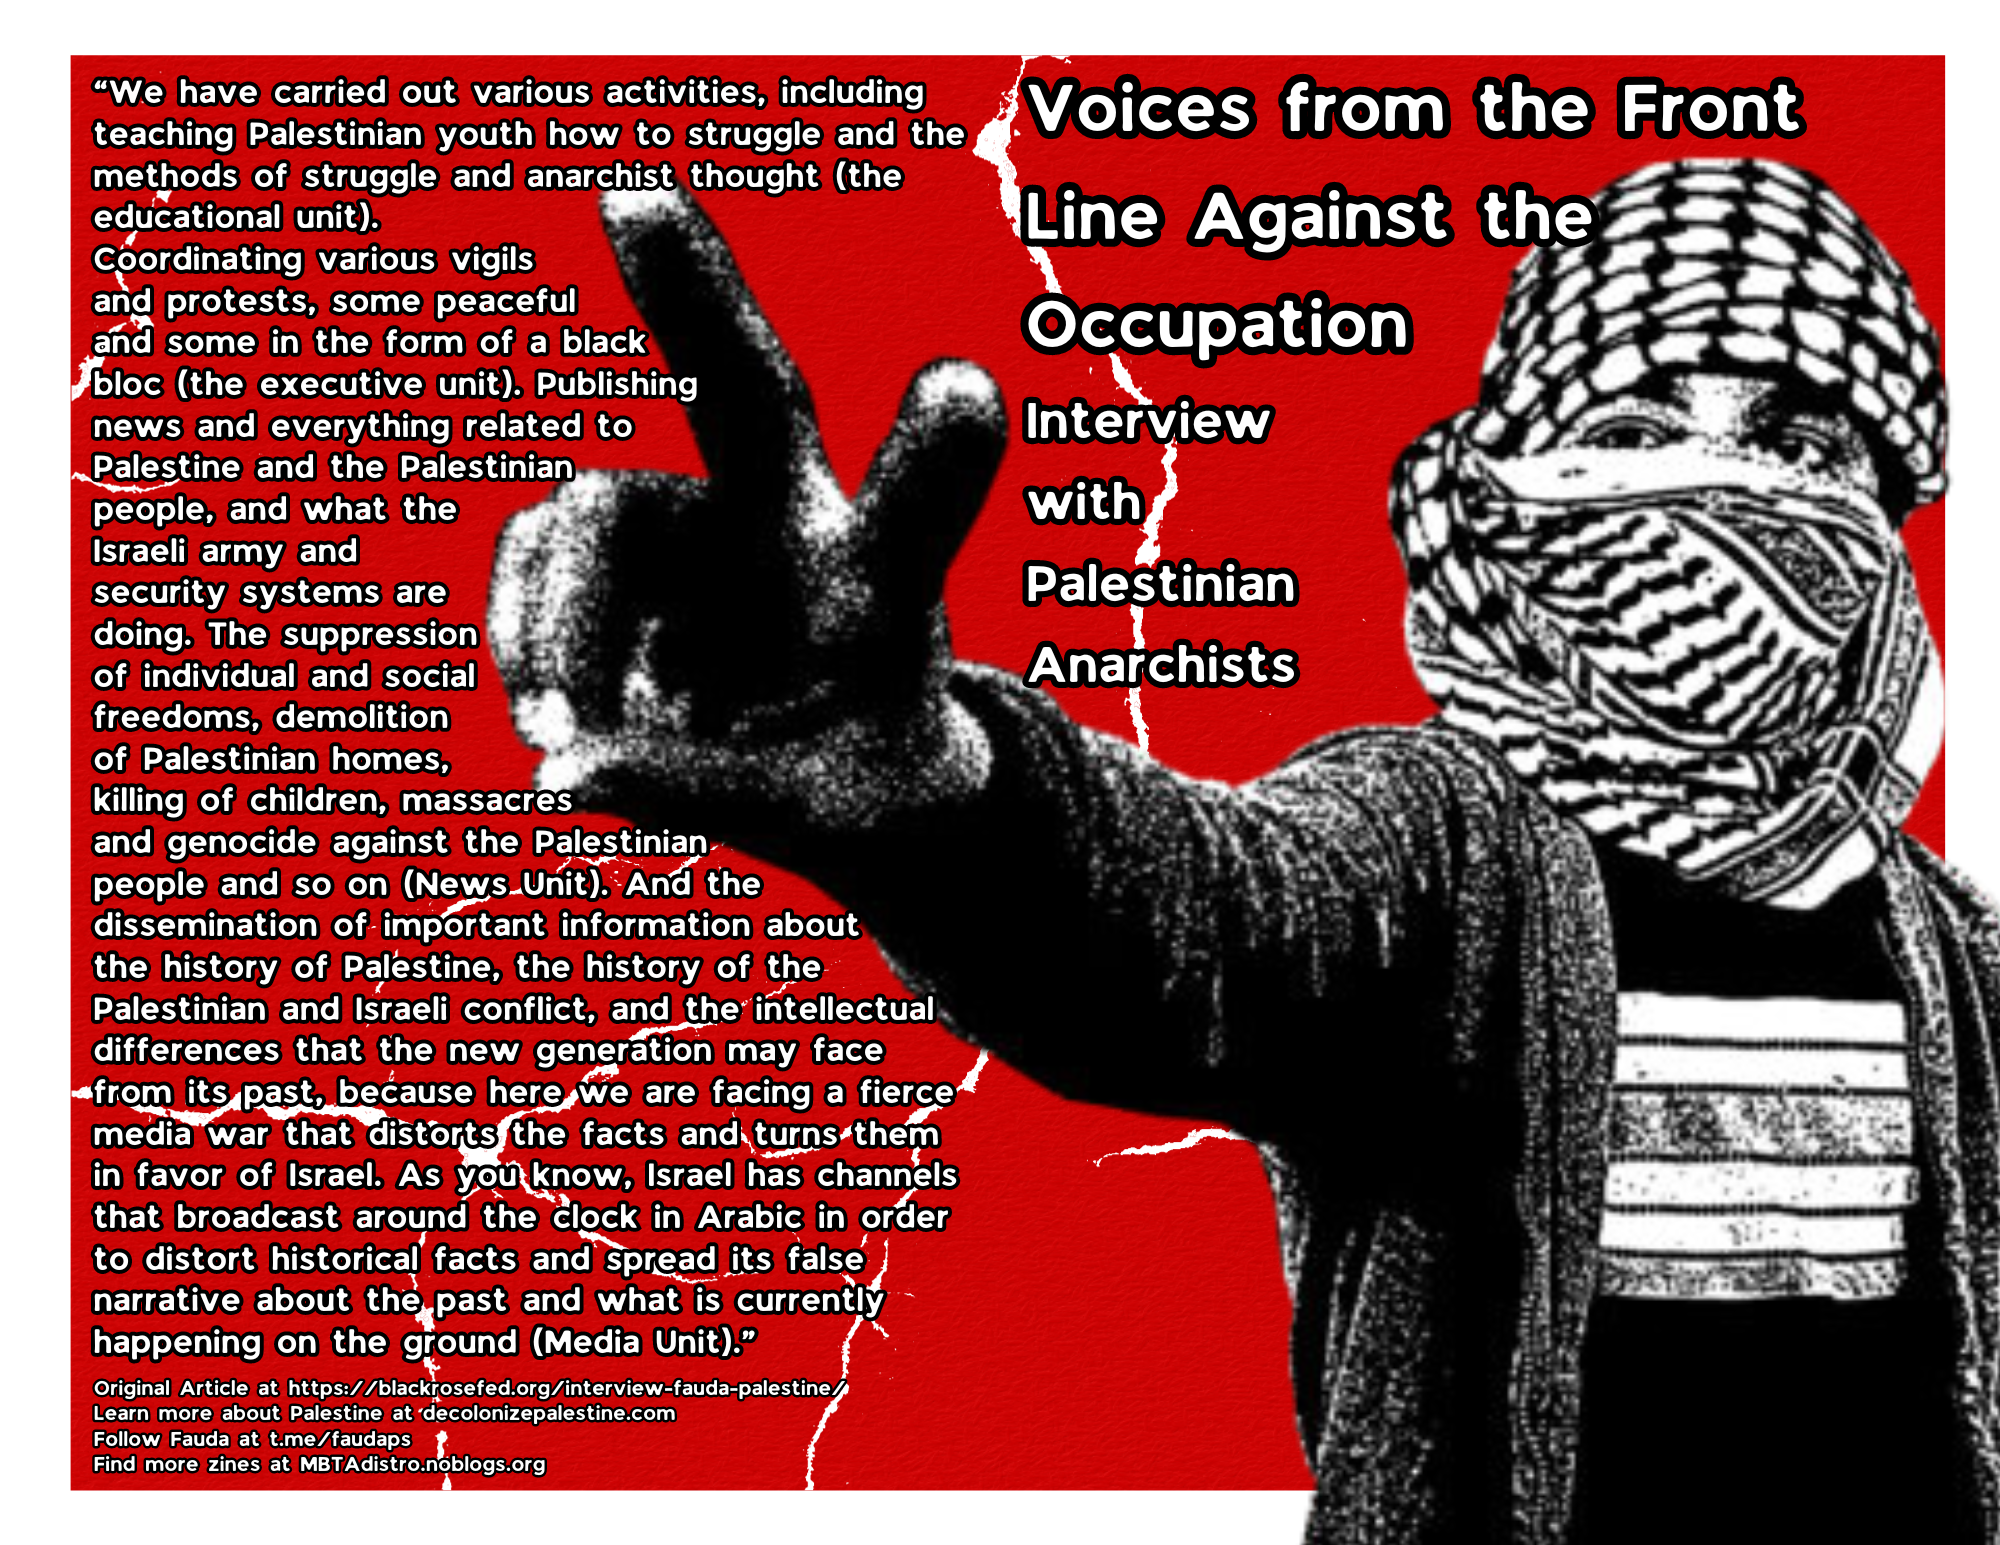 New Zine: Format of “Voices from the Front Line Against the Occupation: Interview with Palestinian Anarchists”